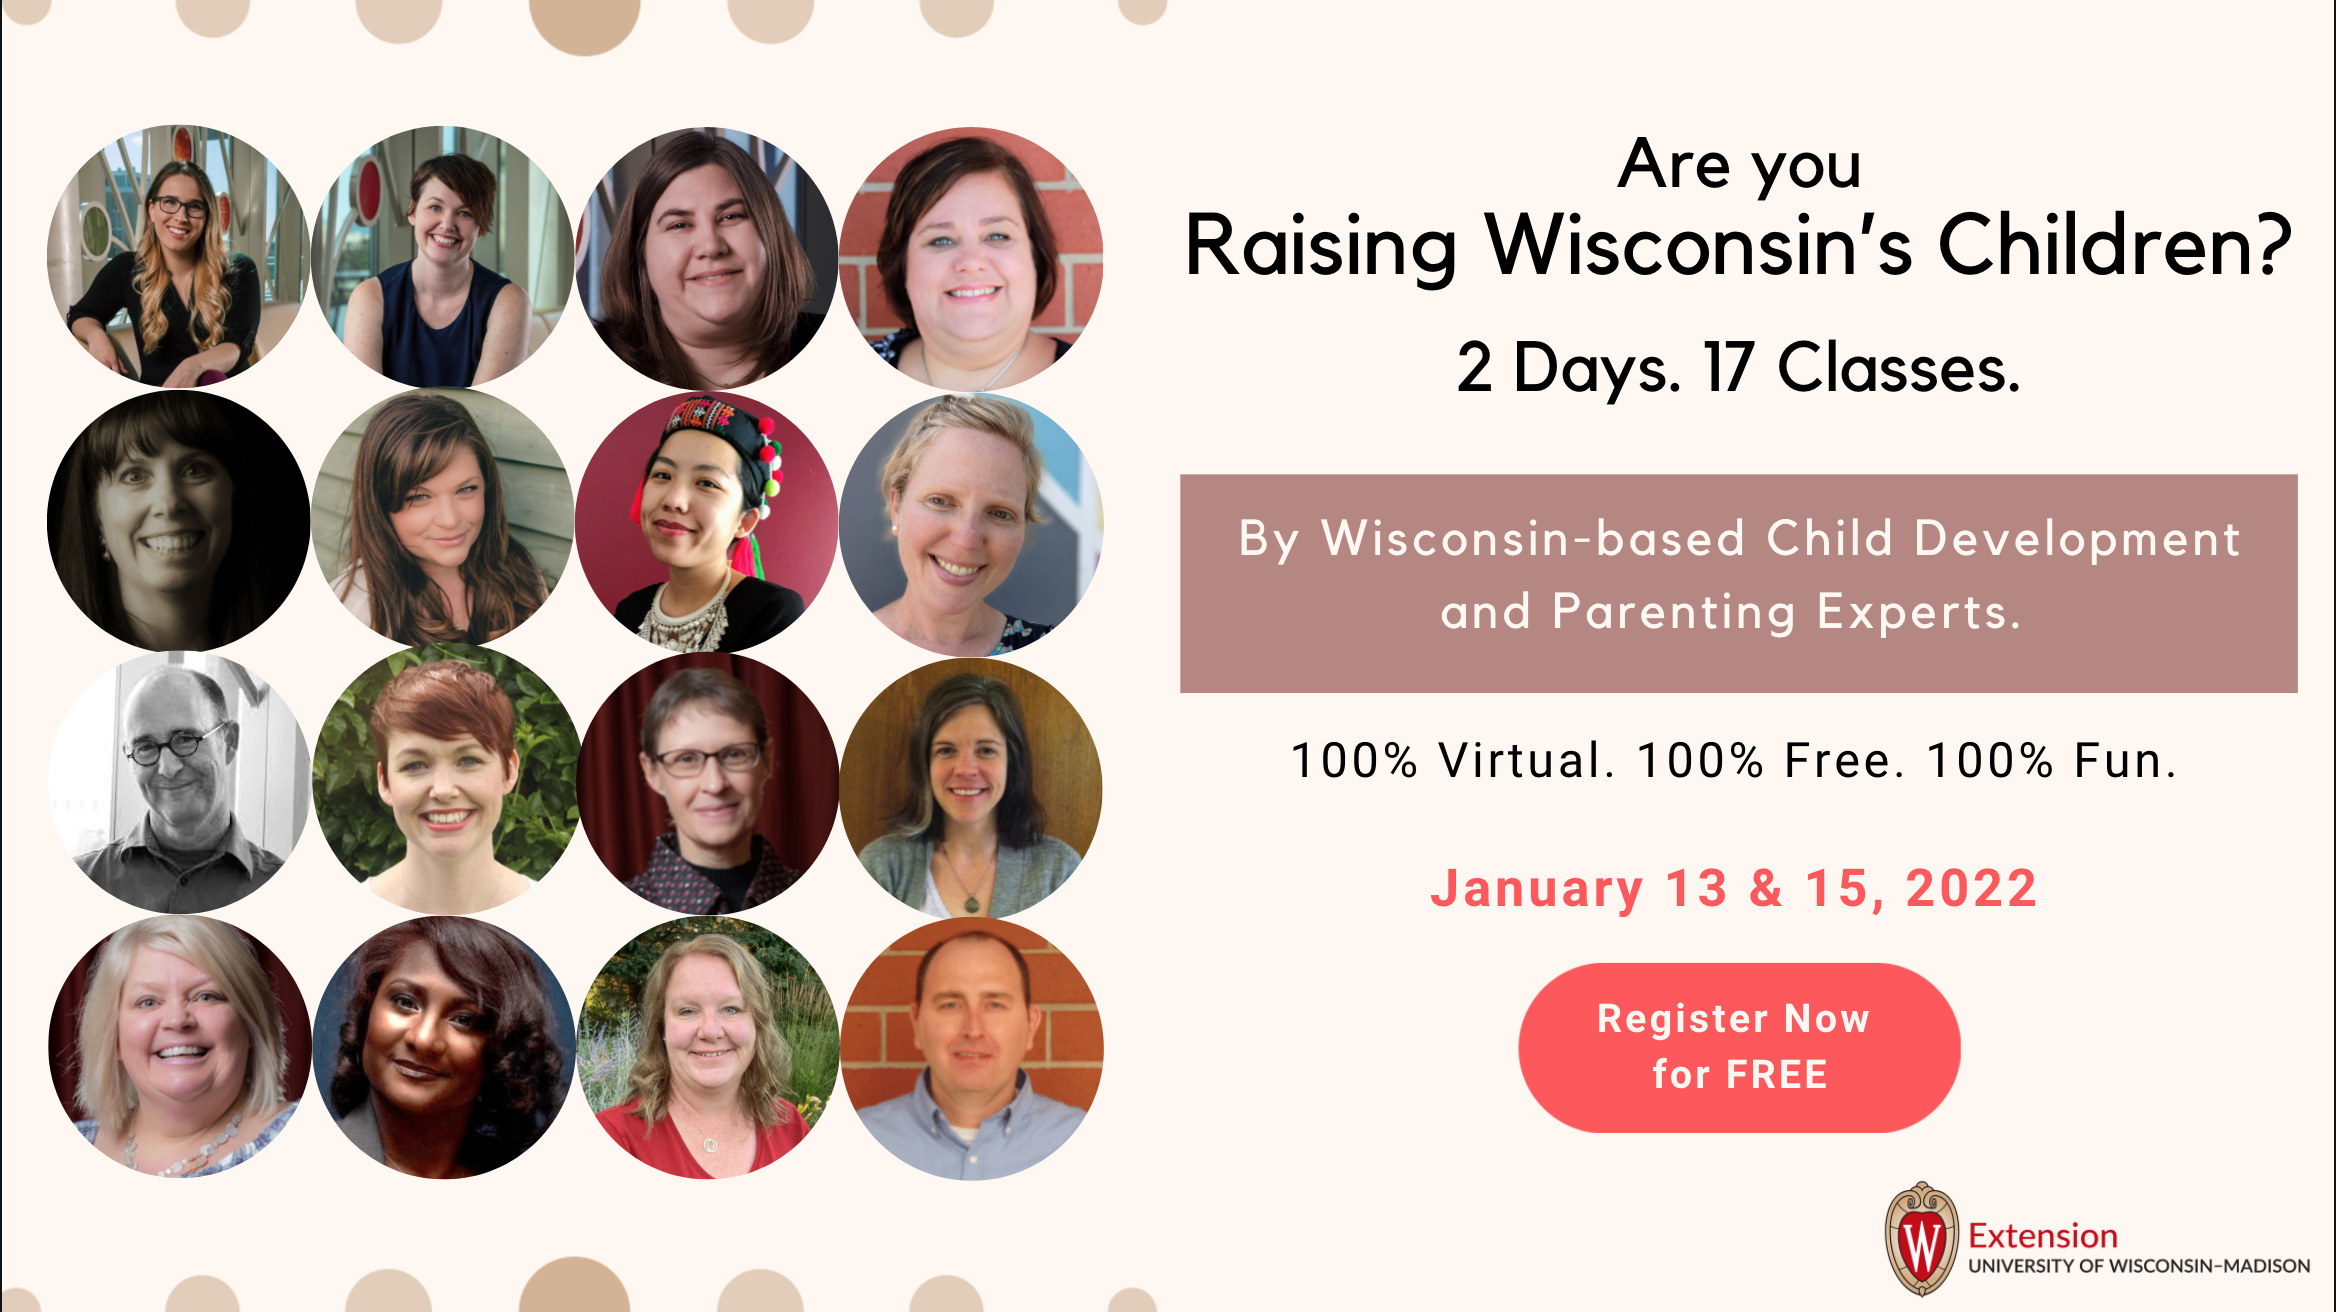 4x4 grid of circles with different photos of faces on left. On right words promoting Raising Wisconsin's Children conference Jan 13 and 15 2022. Register now.